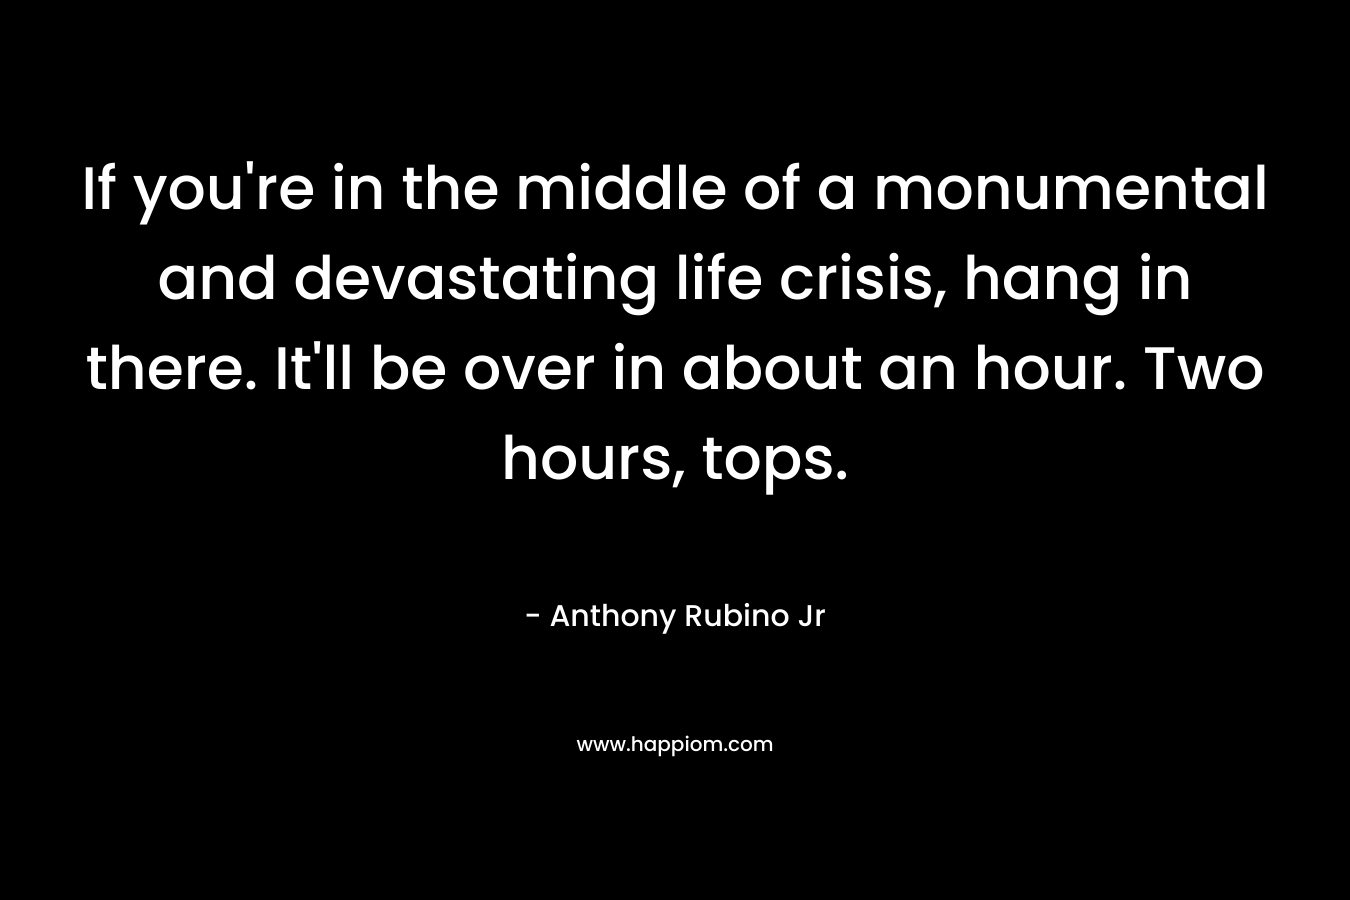 If you’re in the middle of a monumental and devastating life crisis, hang in there. It’ll be over in about an hour. Two hours, tops. – Anthony Rubino Jr